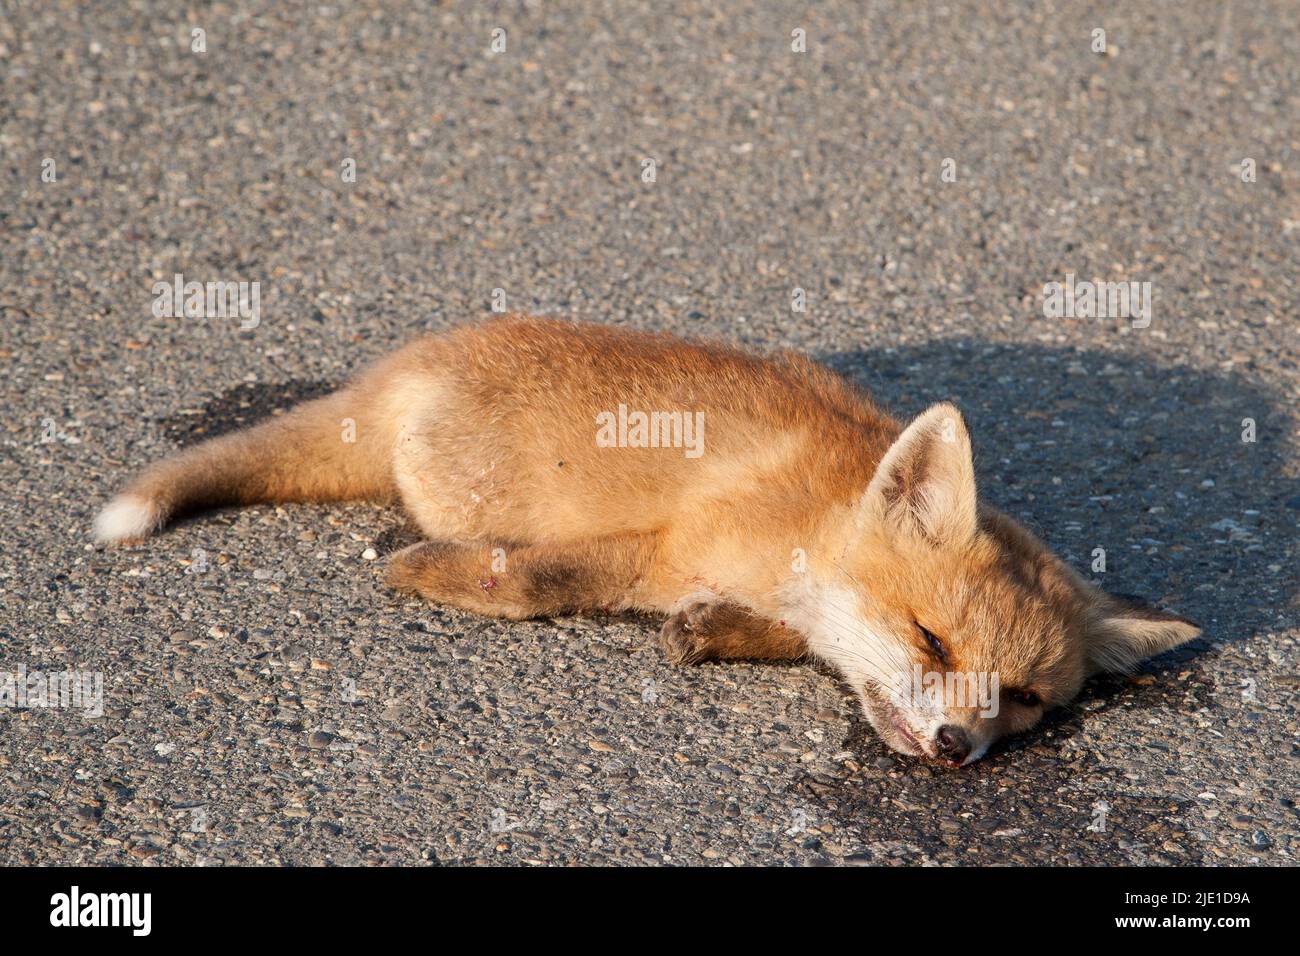 A sad sight on the side of the road, a young fox run over. The roads in Europe are a battlefield where 30 million mammals die every year from traffic. Stock Photo